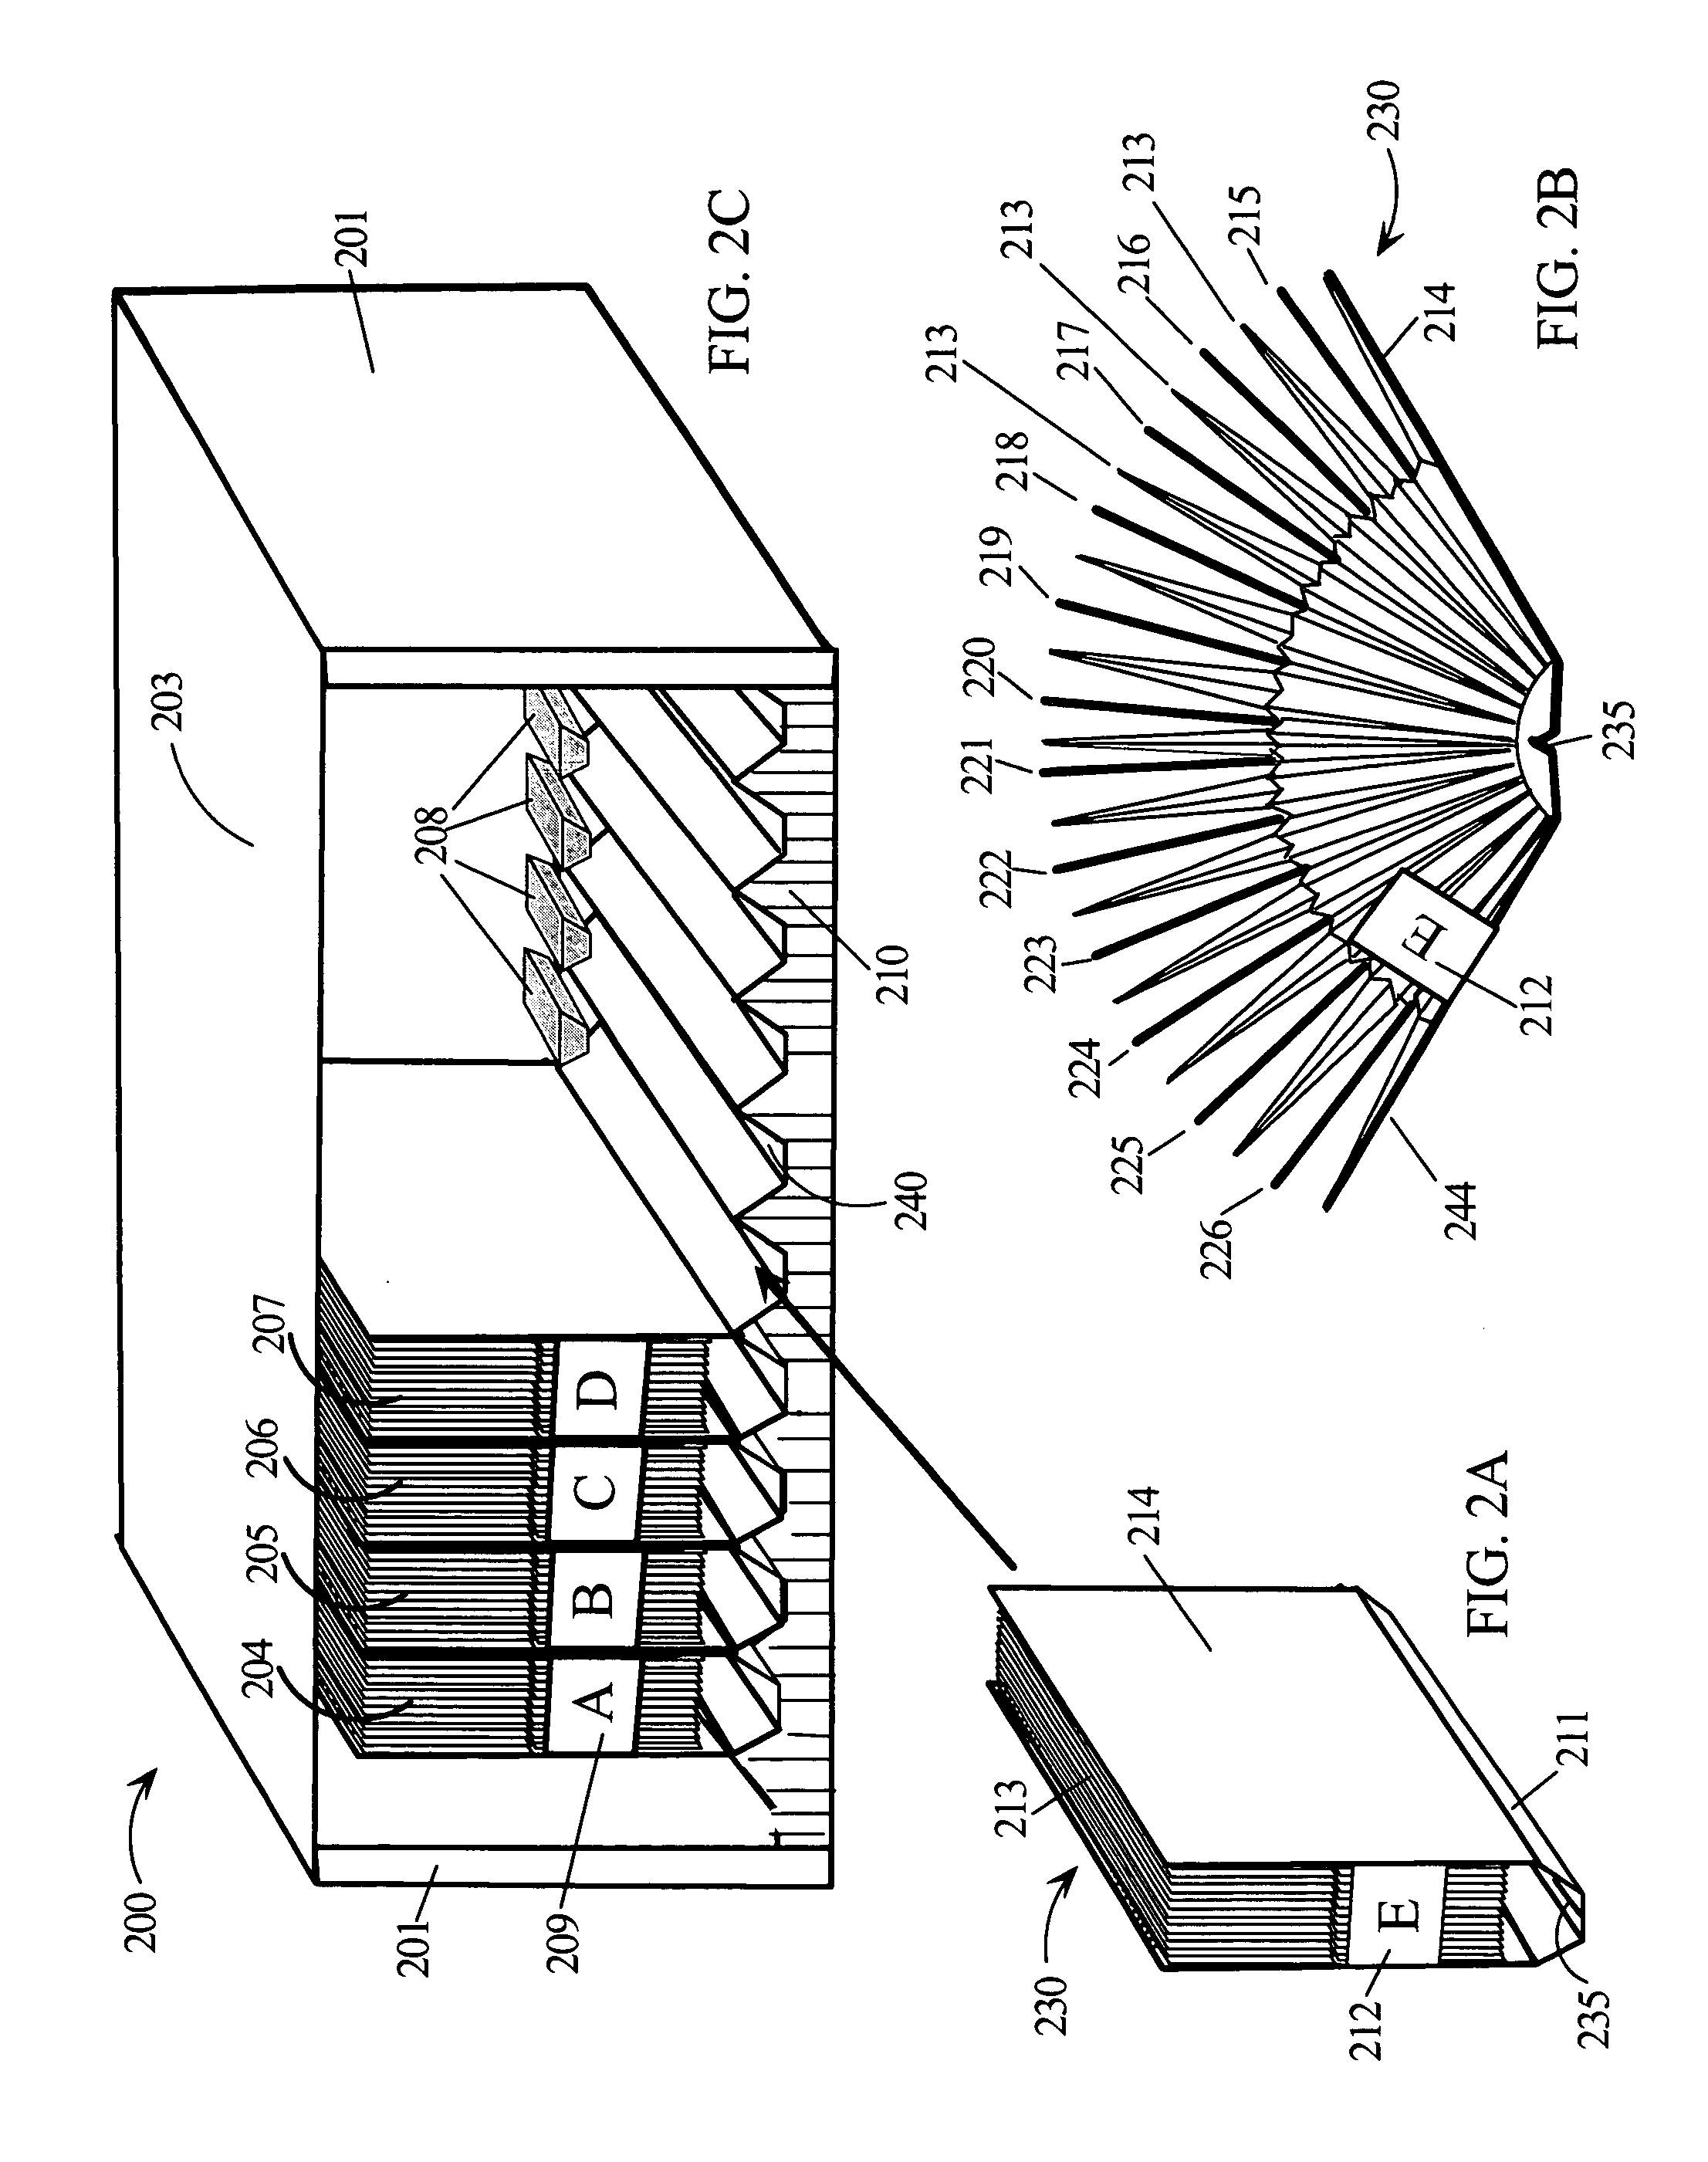 Storage system for storing, accessing and transporting planar media